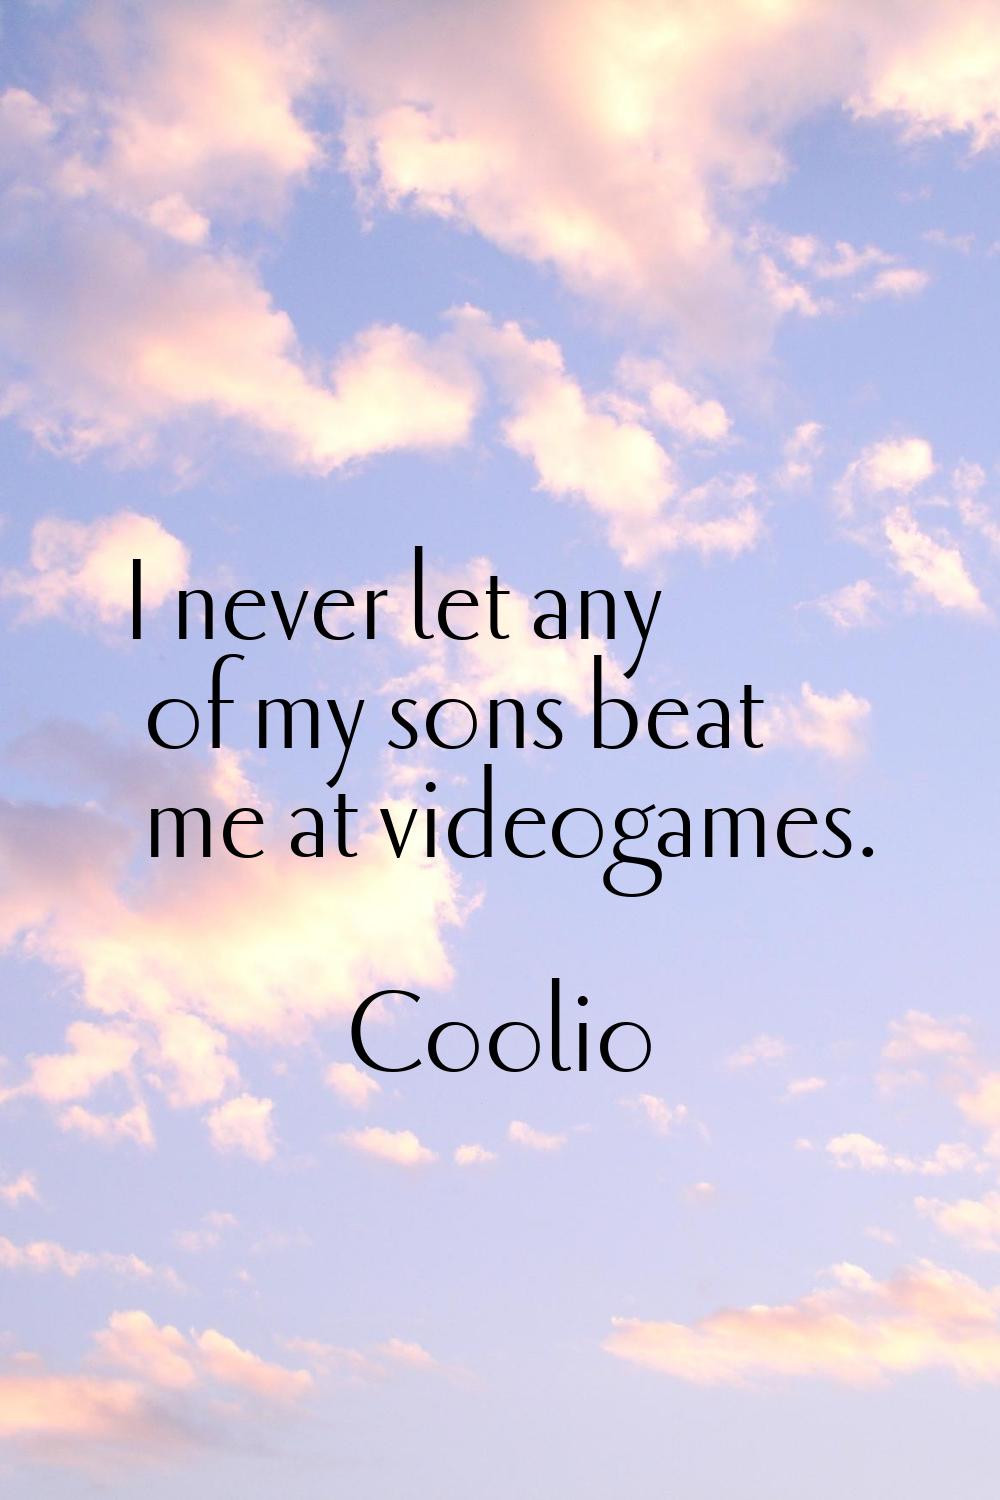 I never let any of my sons beat me at videogames.